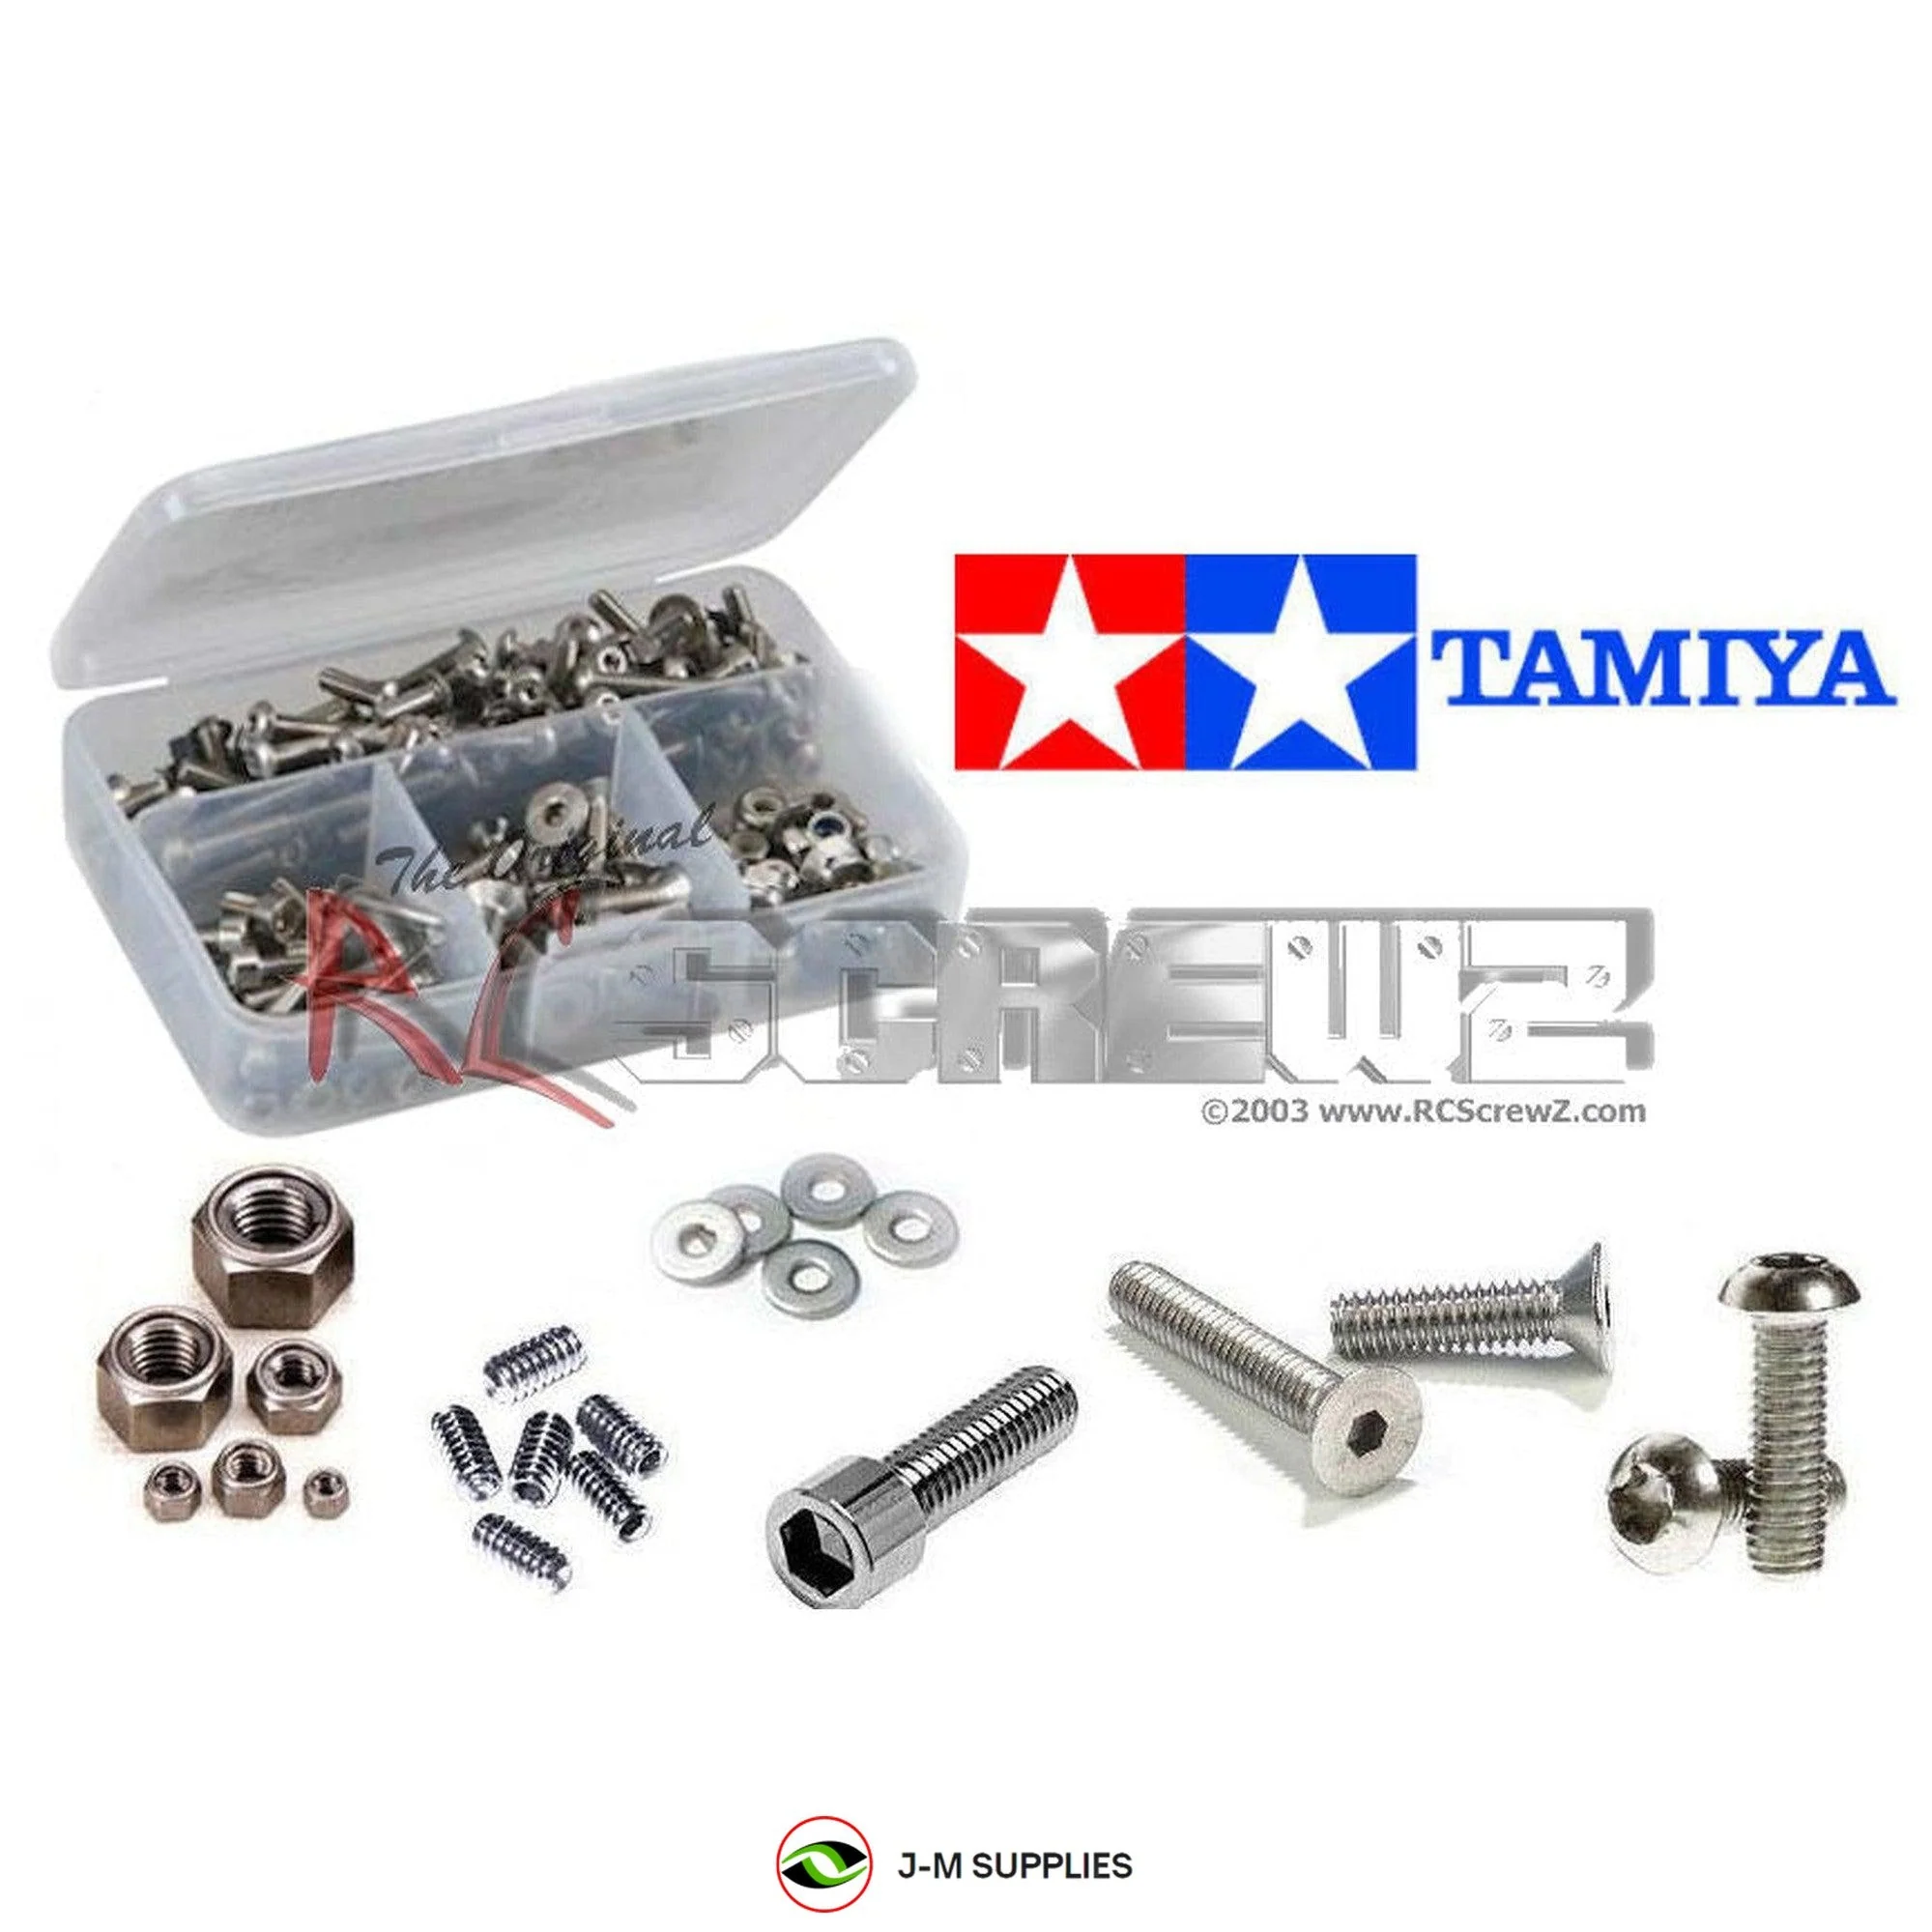 RCScrewZ Stainless Screw Kit+ tam204 for Tamiya F201 #58303 (Screw Case) - Picture 1 of 12